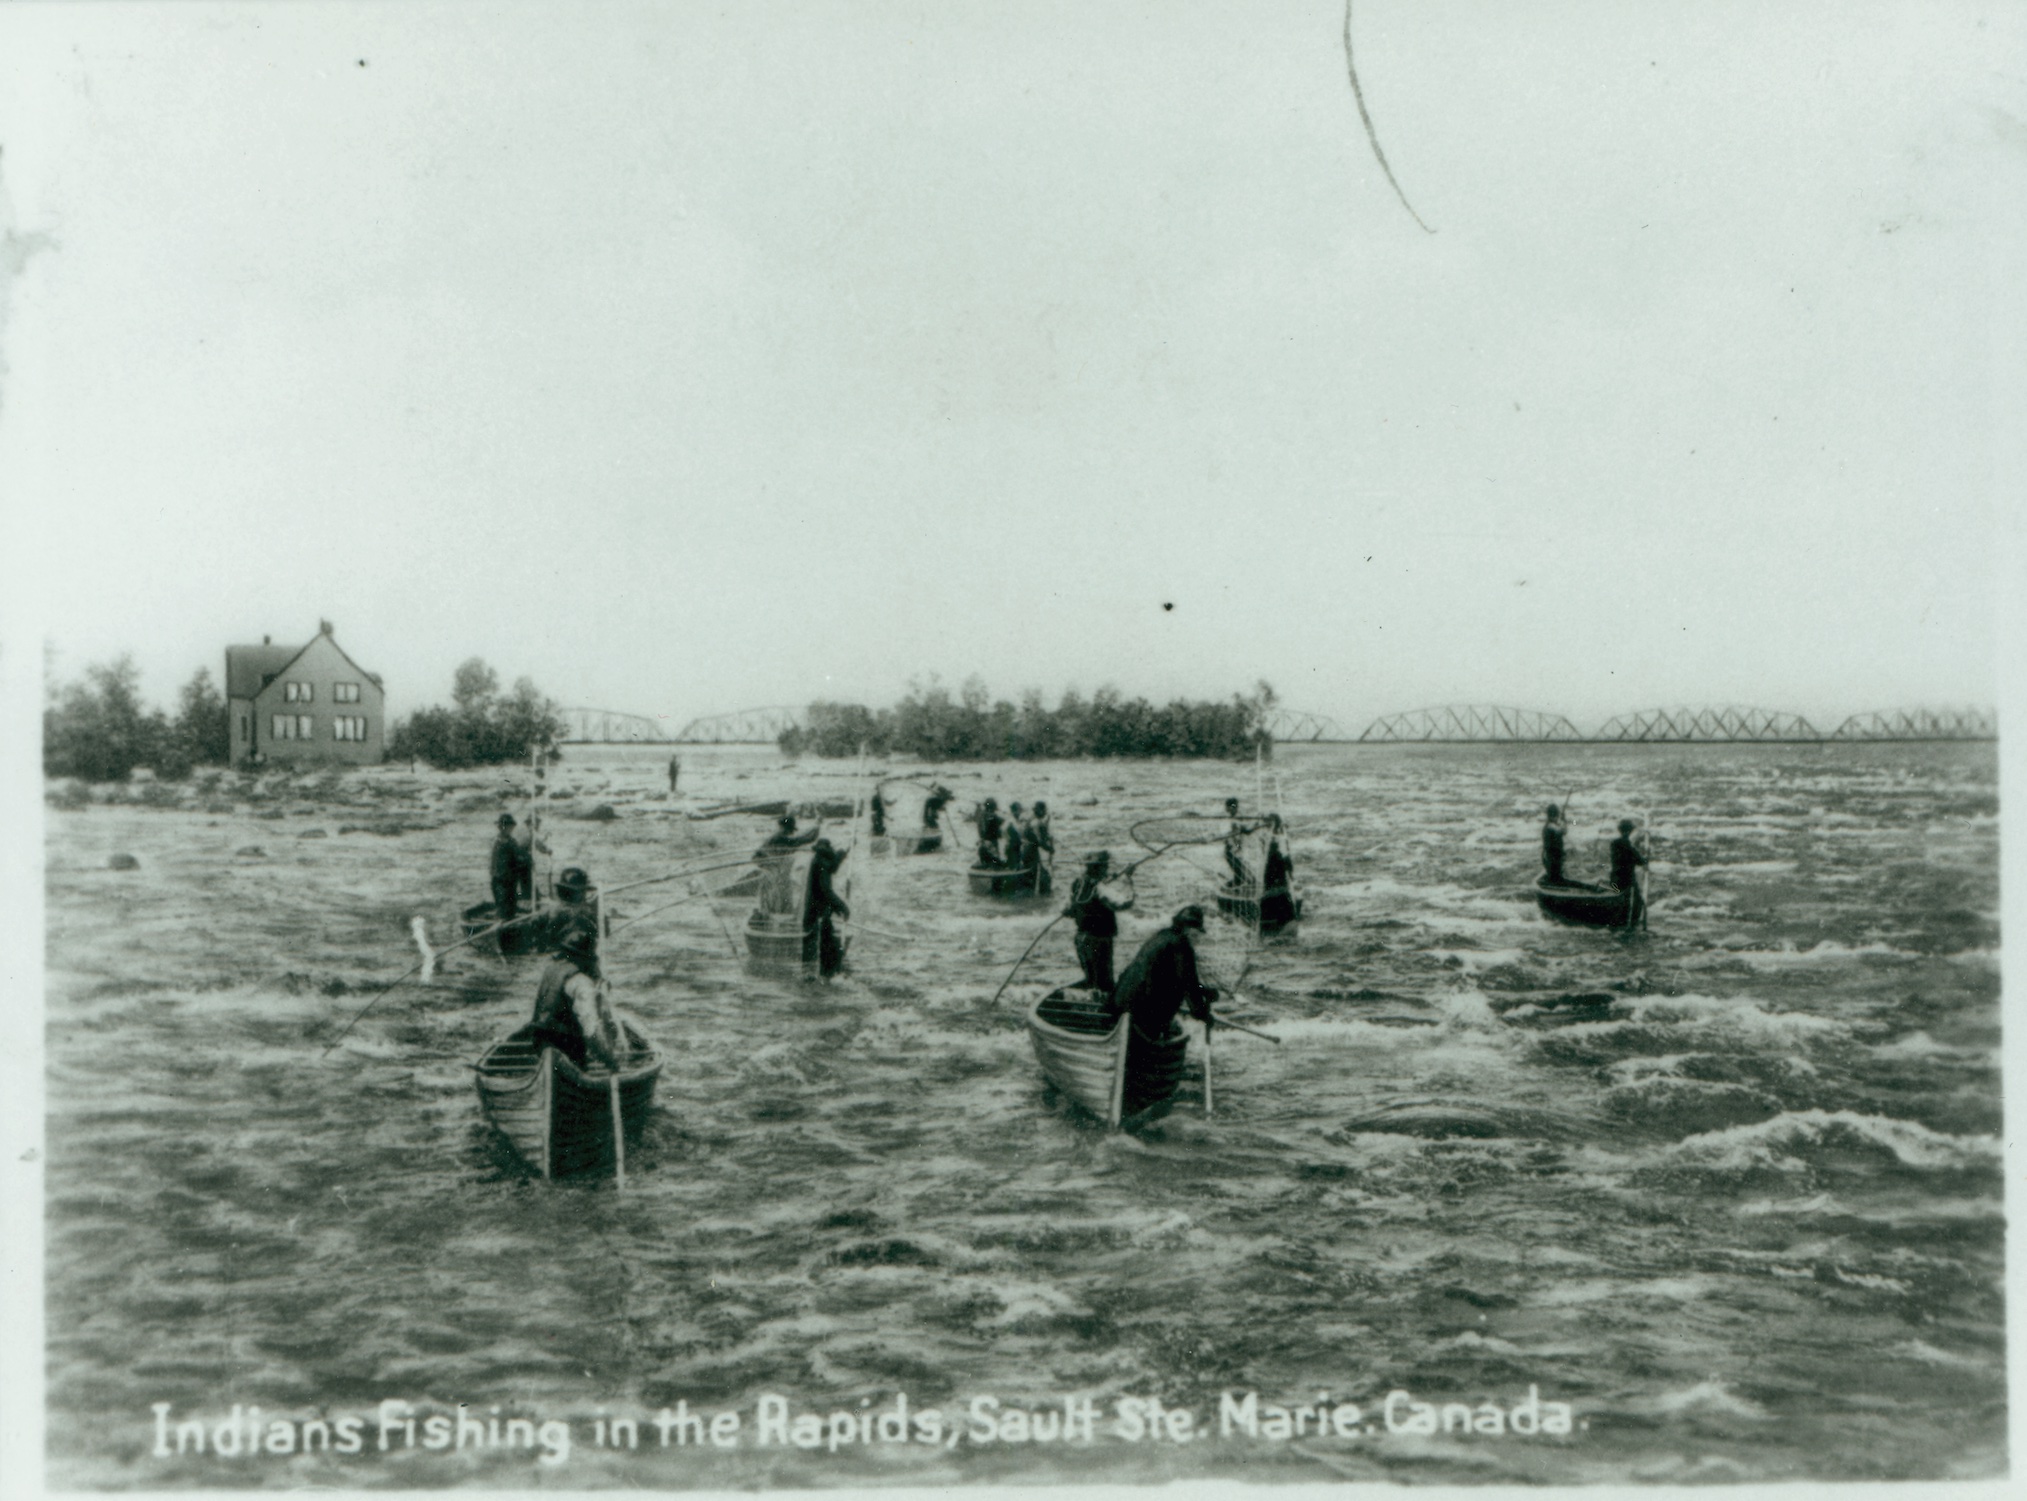 Anishinabek fishing in the St. Mary's River around 1885.